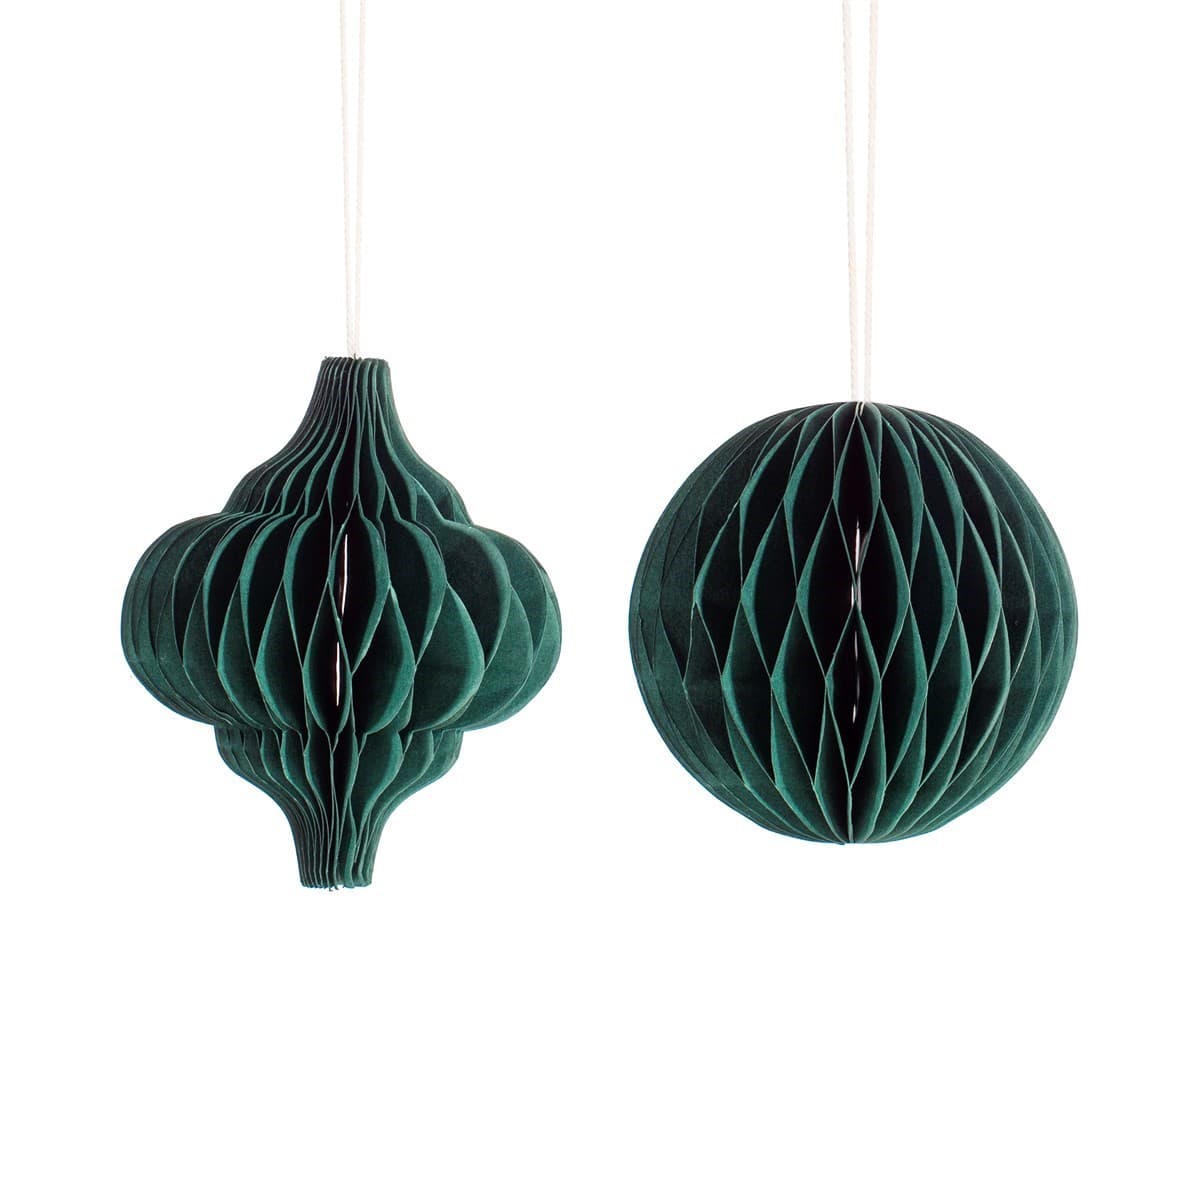 Sass & Belle Christmas Christmas Decorations Set of 2 Forest Green Honeycomb Christmas Tree Decorations